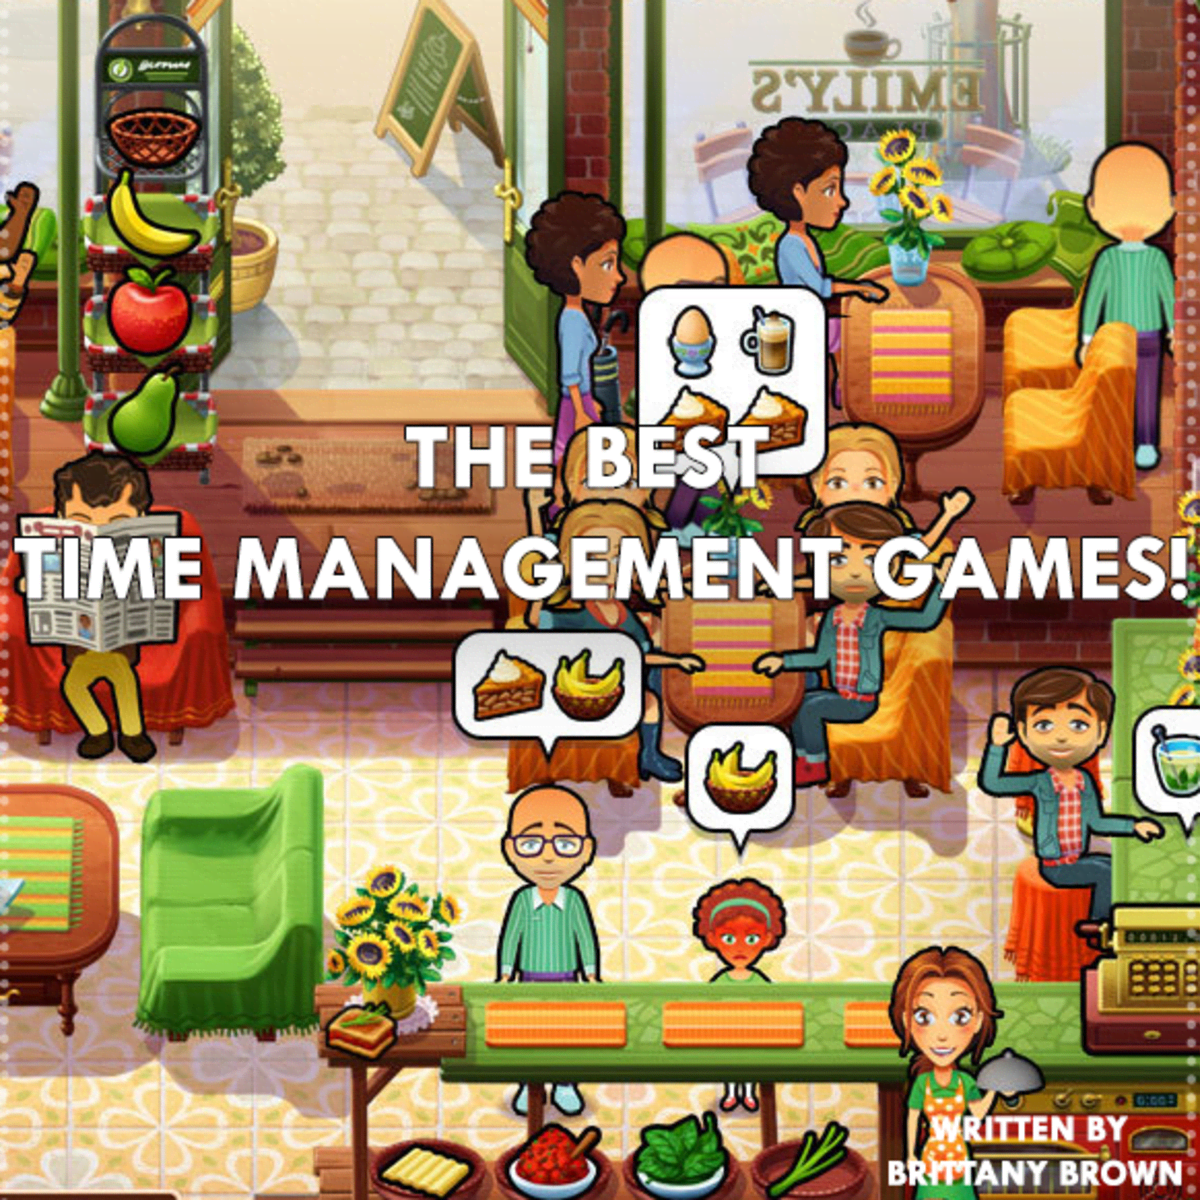 Time Management Games - GameTop